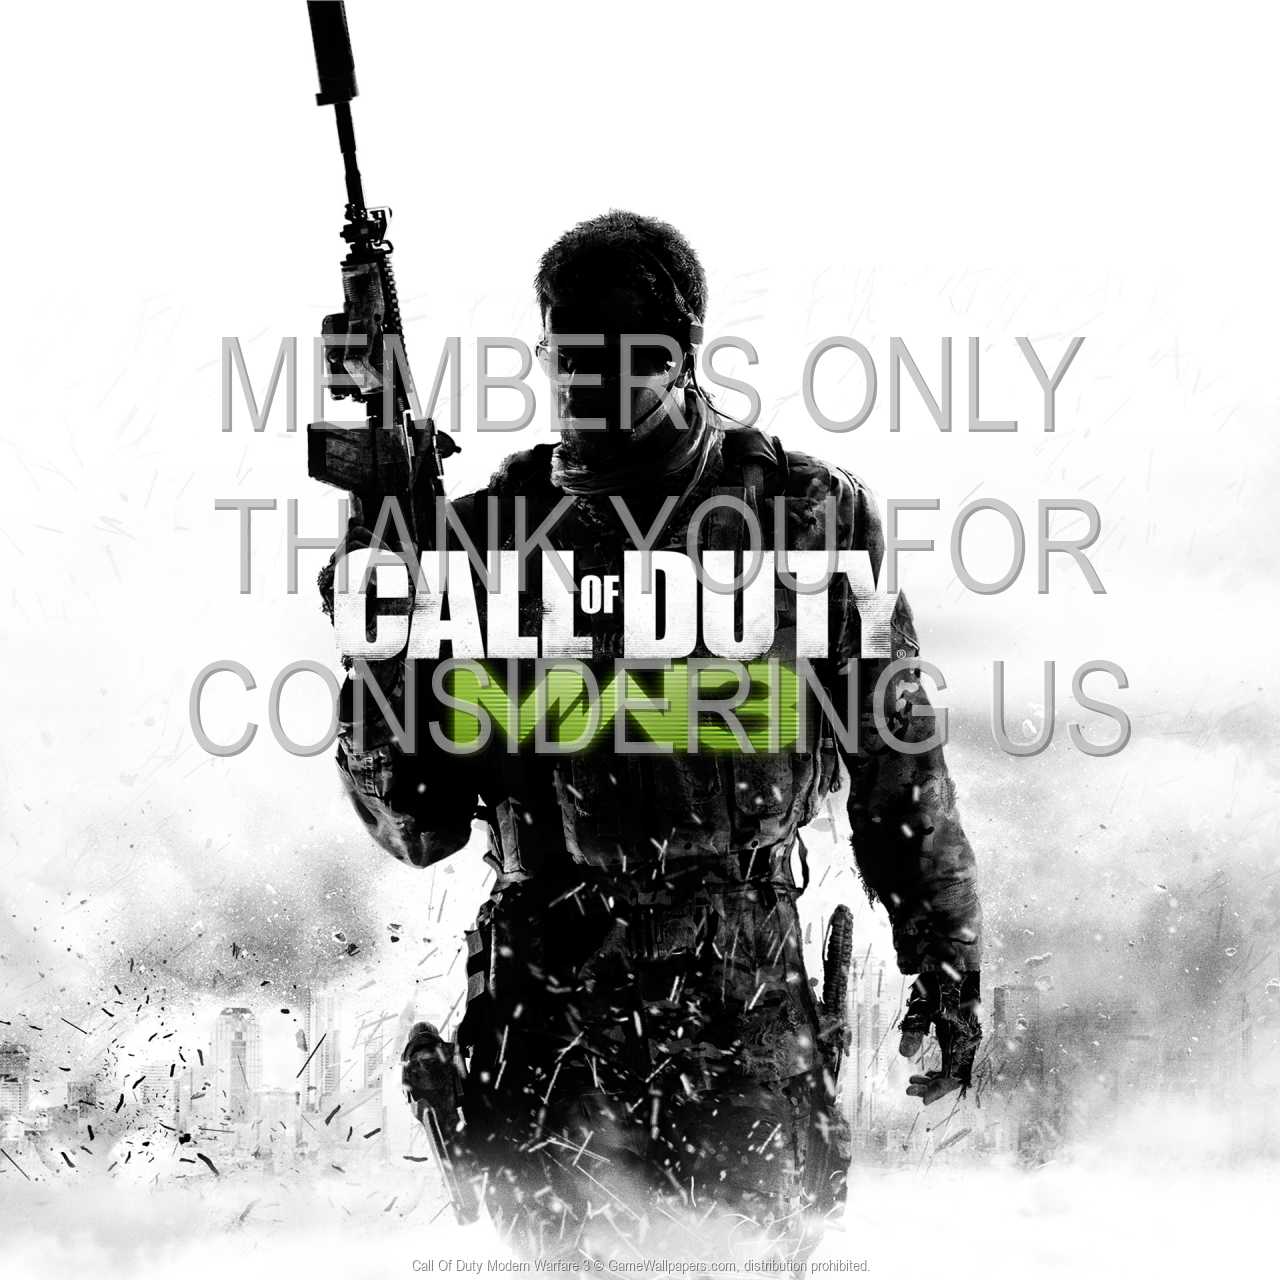 Call Of Duty: Modern Warfare 3 720p Horizontal Mobile wallpaper or background 02